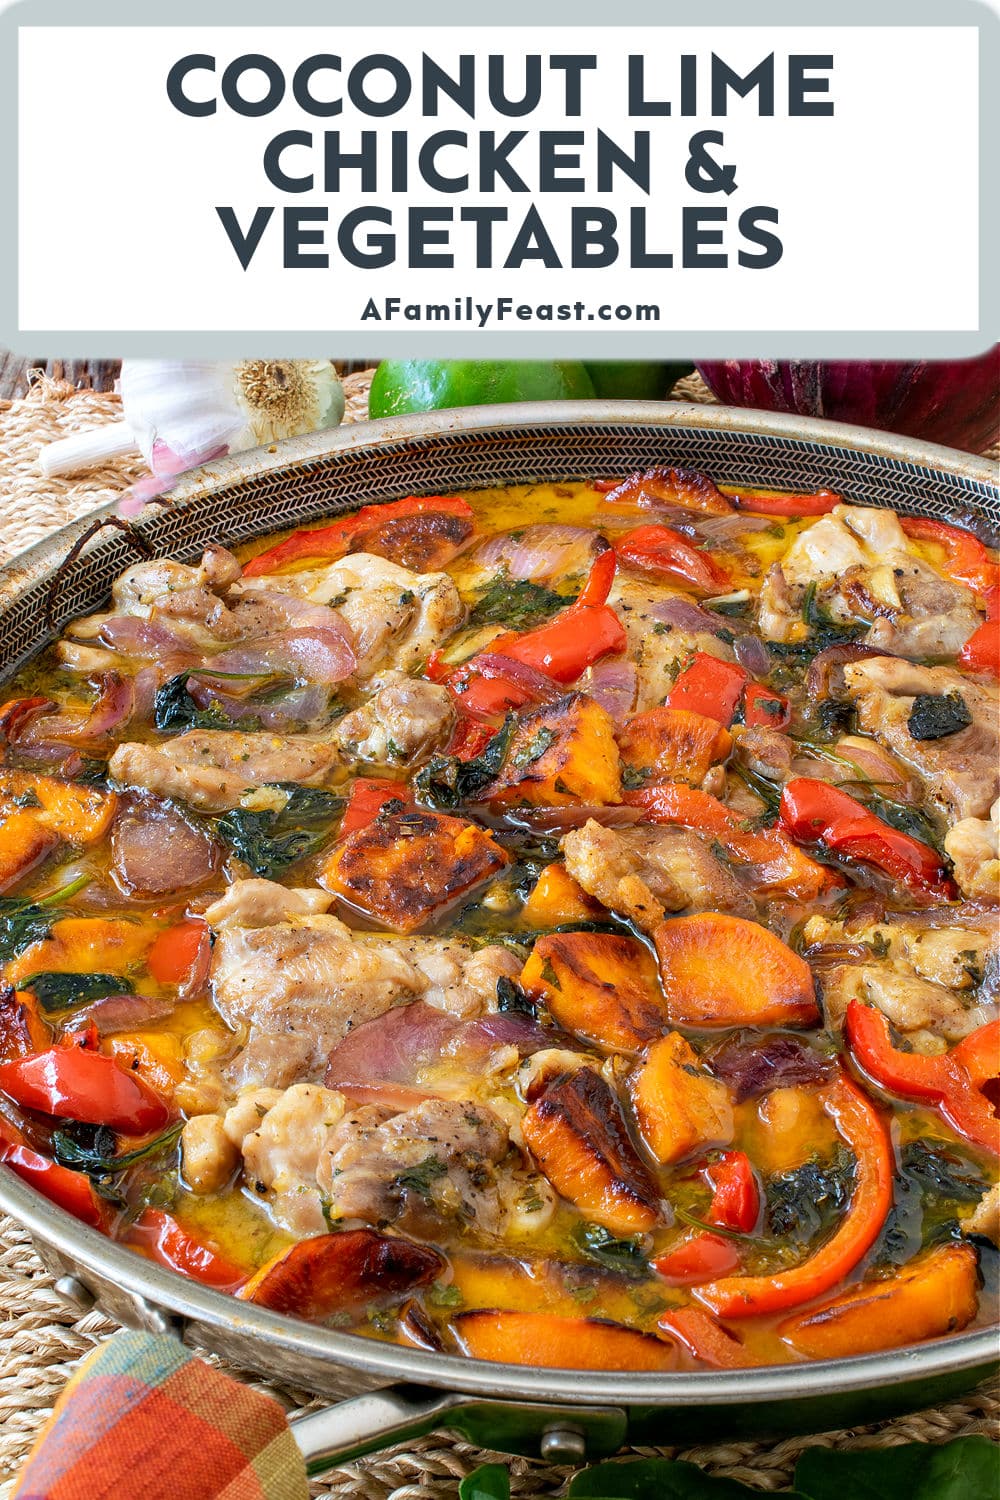 Coconut Lime Chicken and Vegetables - A Family Feast